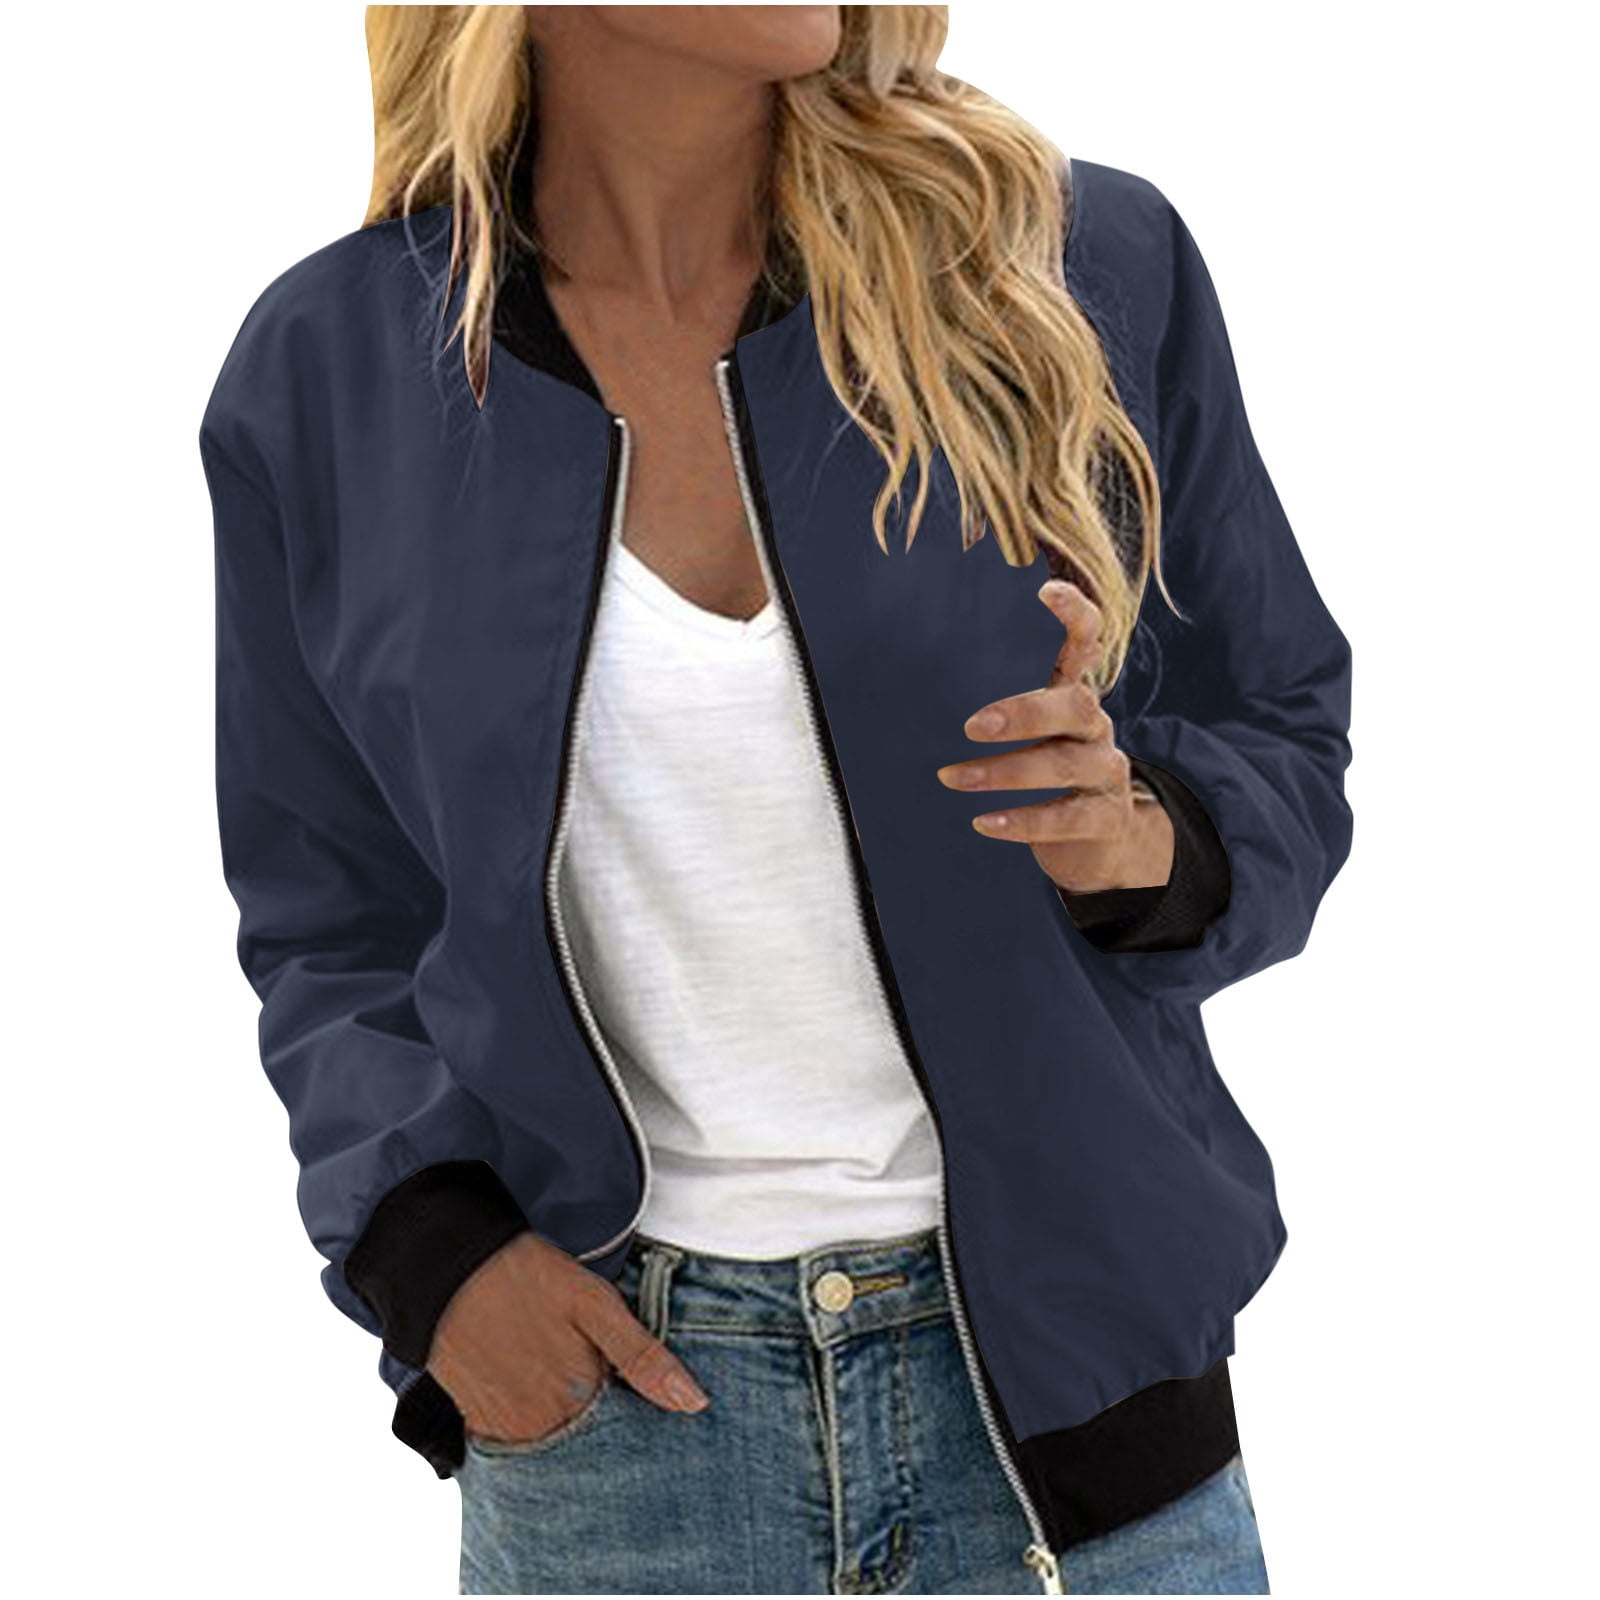 RQYYD Women's Bomber Jacket Casual Long Sleeve Coat Zip Up Outerwear ...